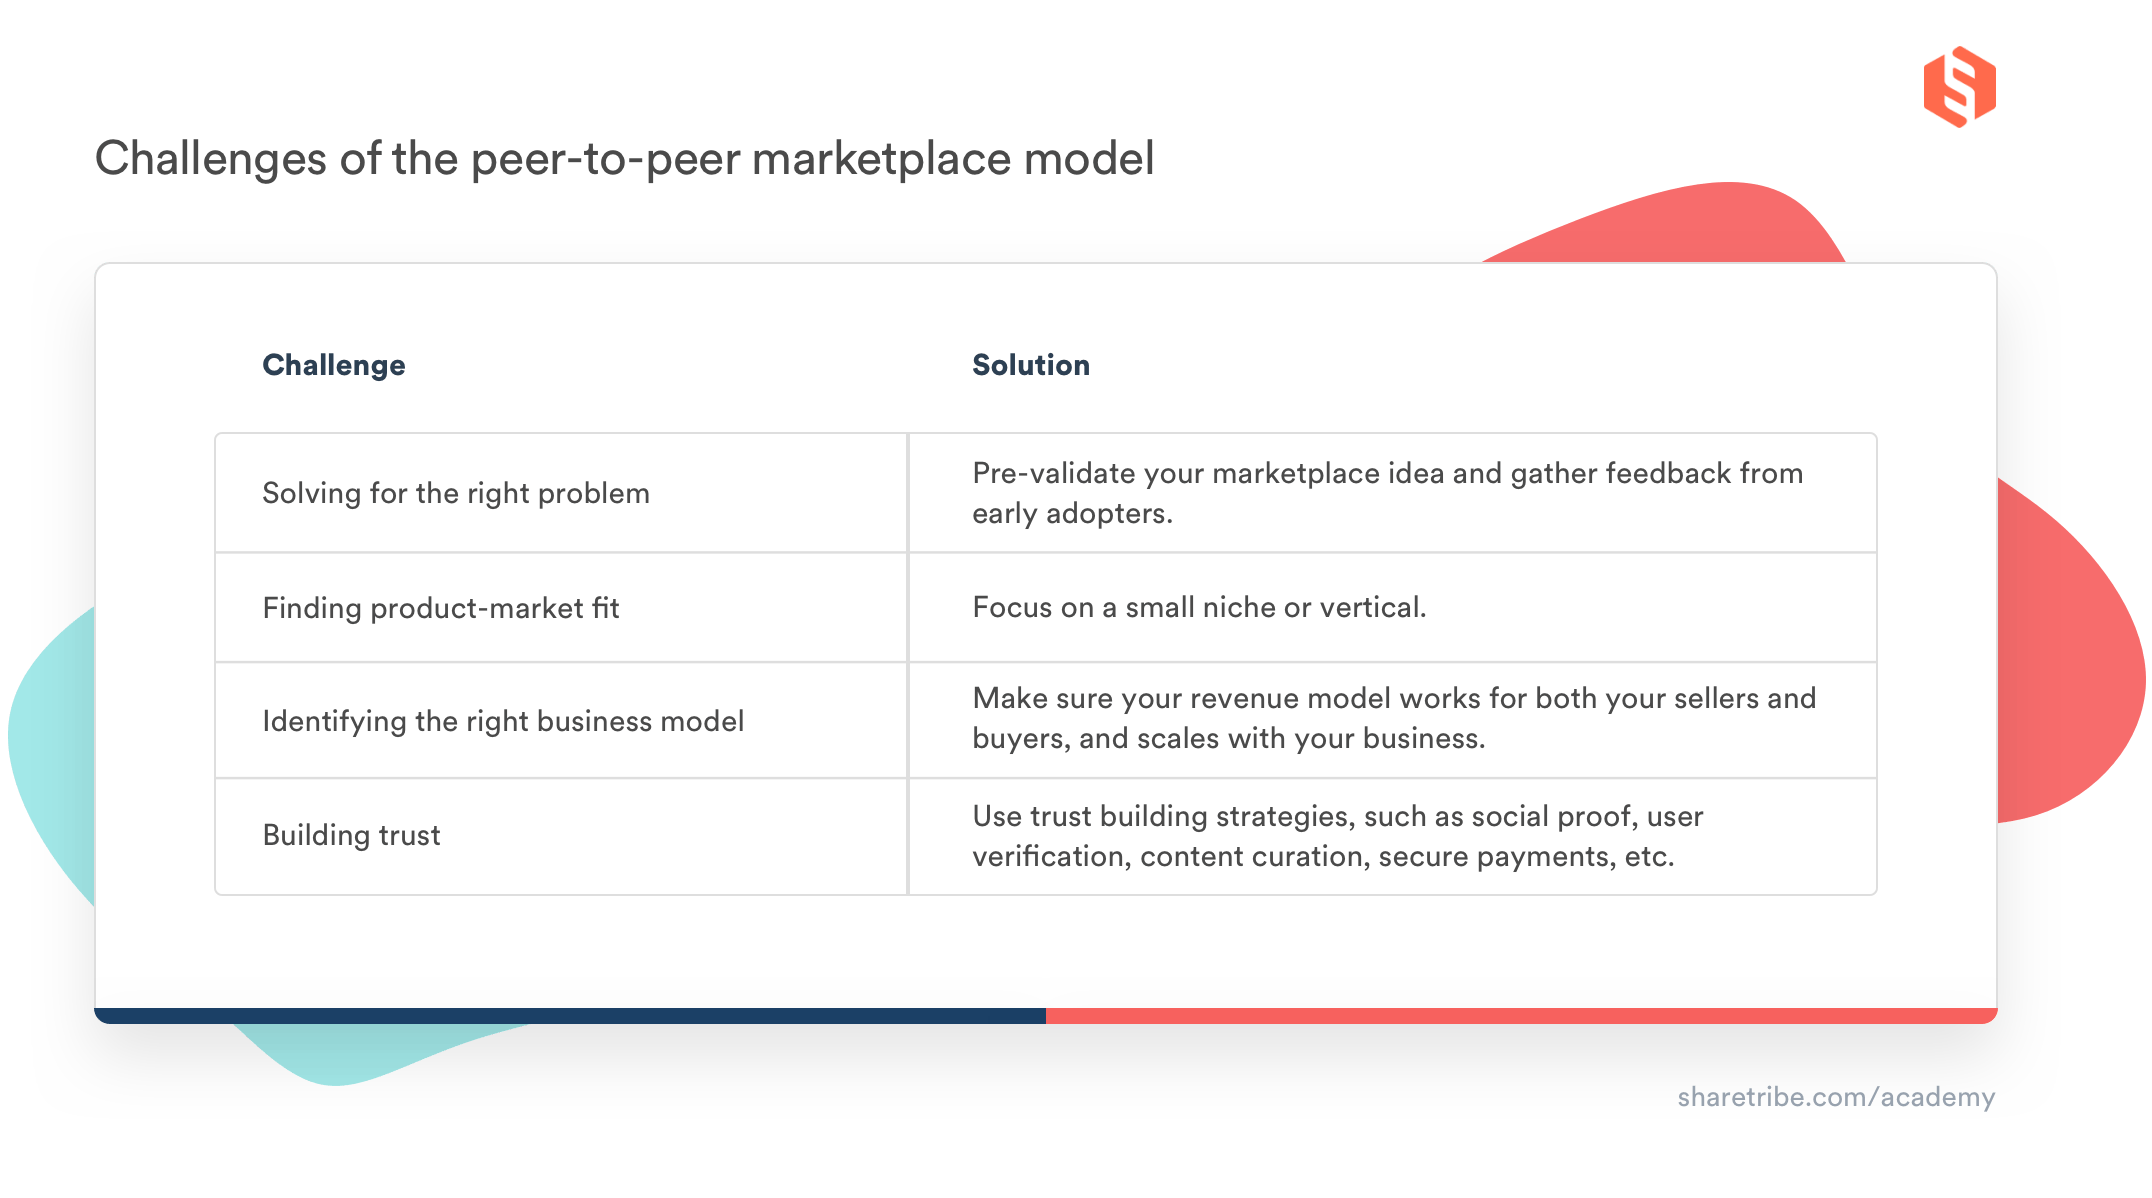 A table illustrating peer-to-peer marketplace challenges and solutions